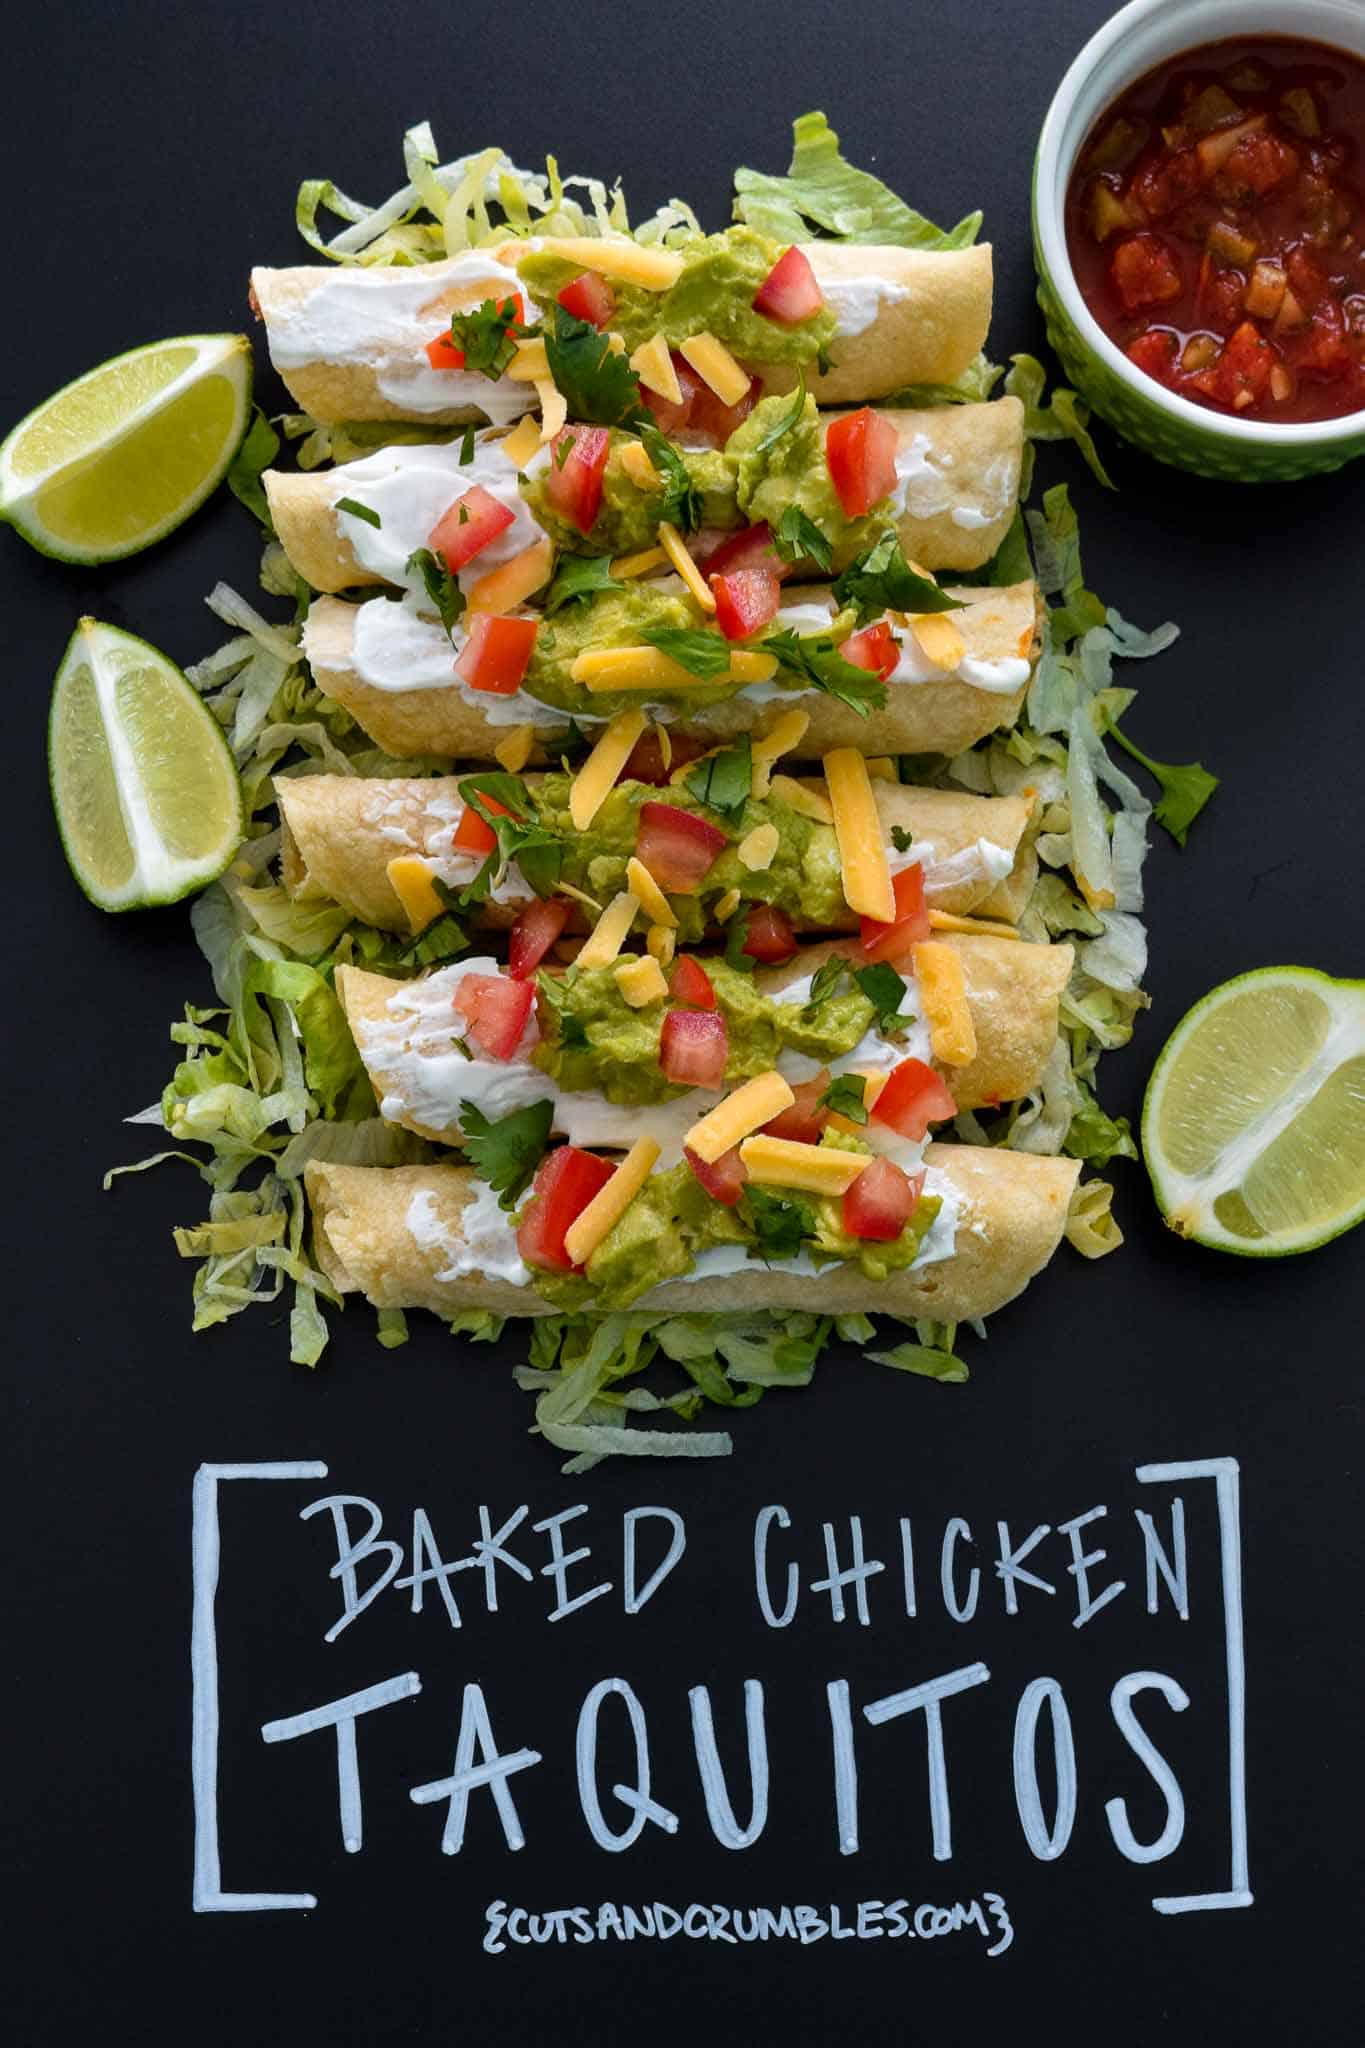 Baked Chicken Taquitos with title written on chalkboard